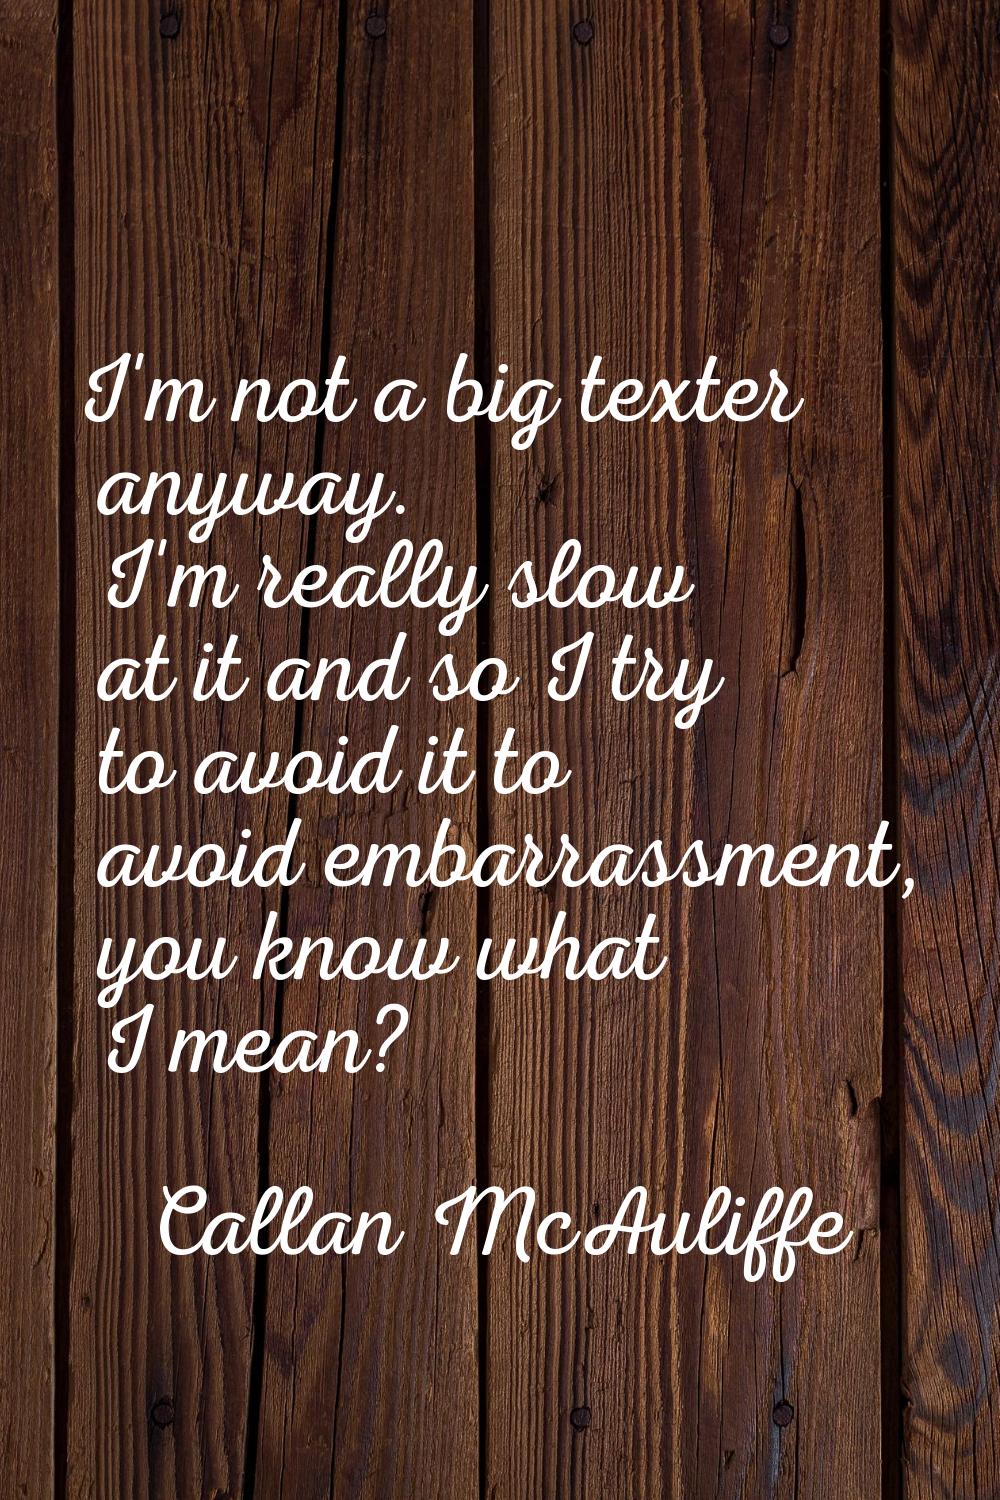 I'm not a big texter anyway. I'm really slow at it and so I try to avoid it to avoid embarrassment,